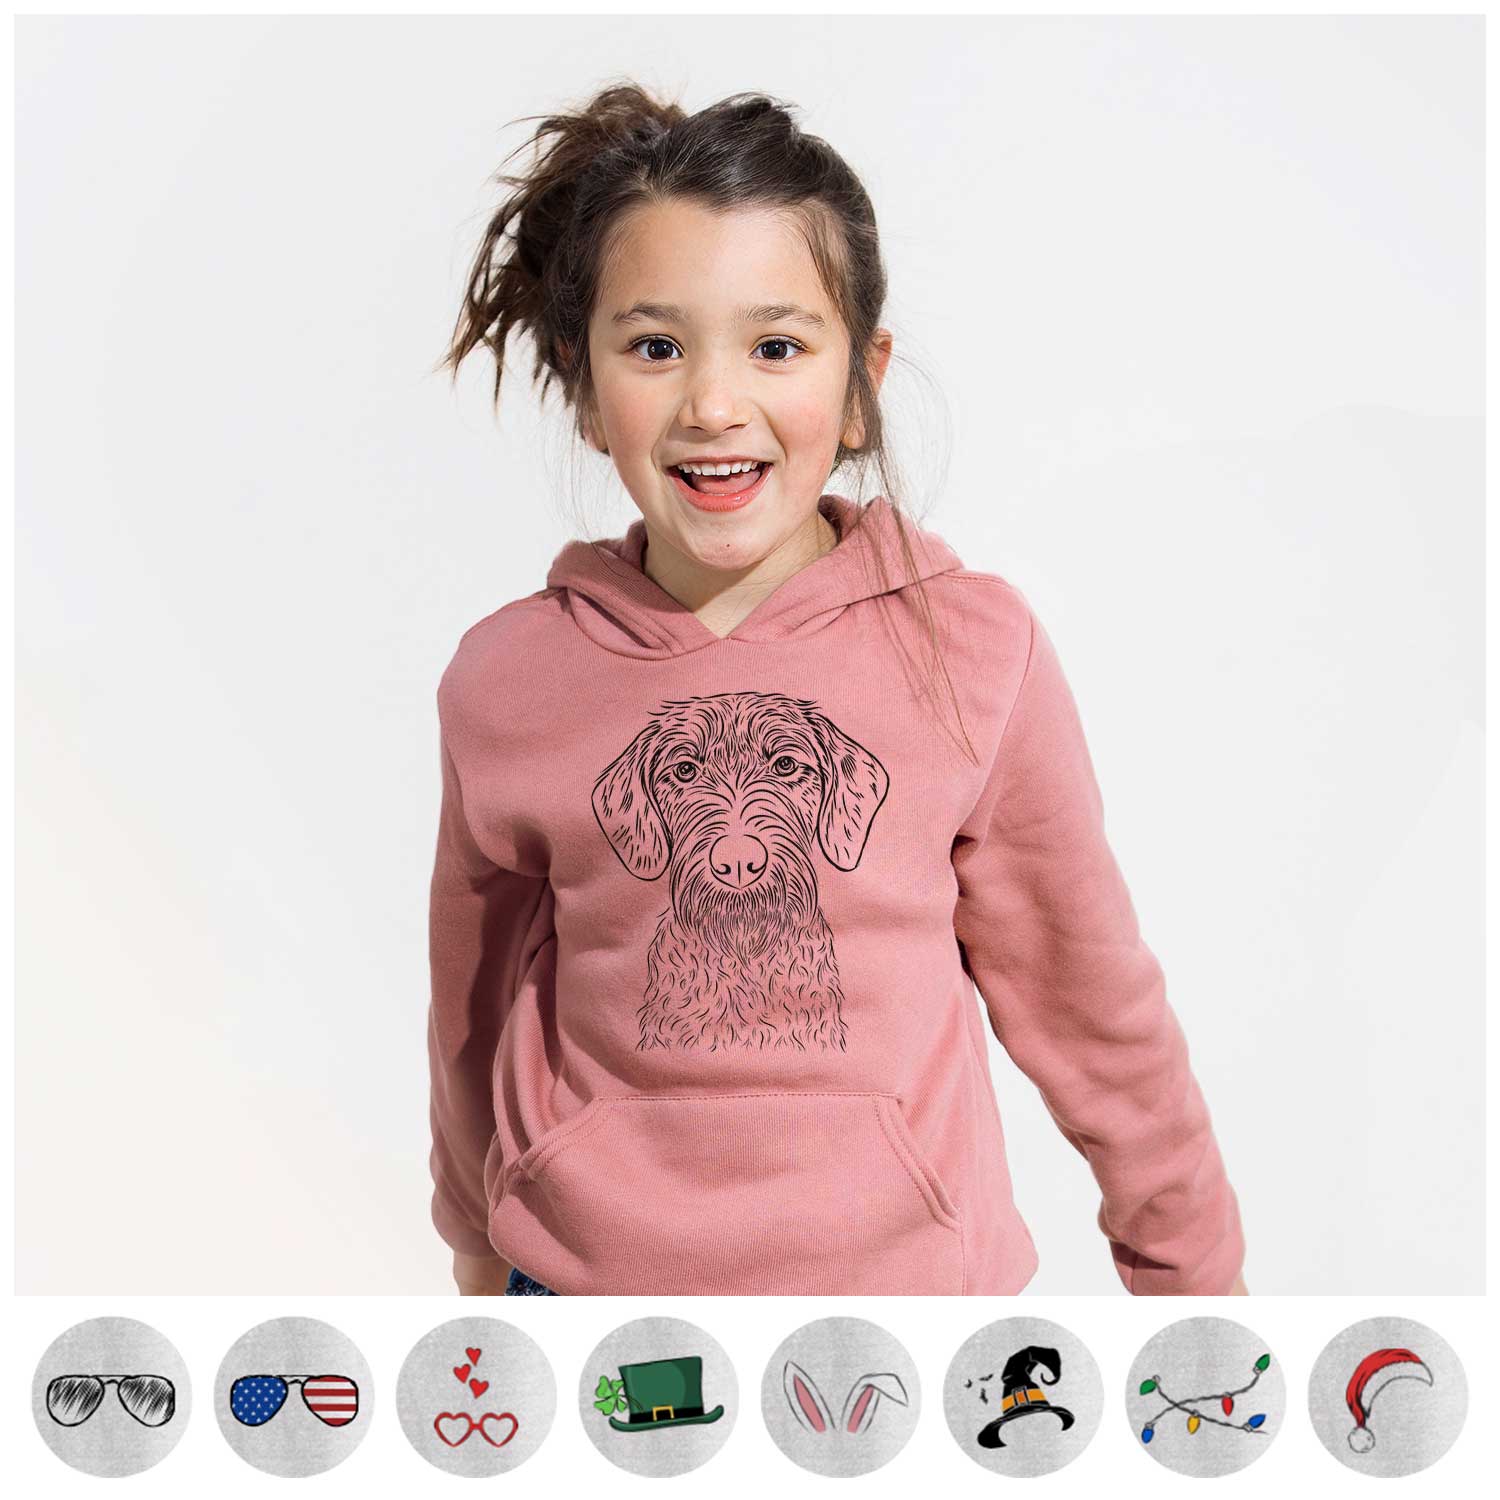 Gus the German Wirehaired Pointer - Youth Hoodie Sweatshirt